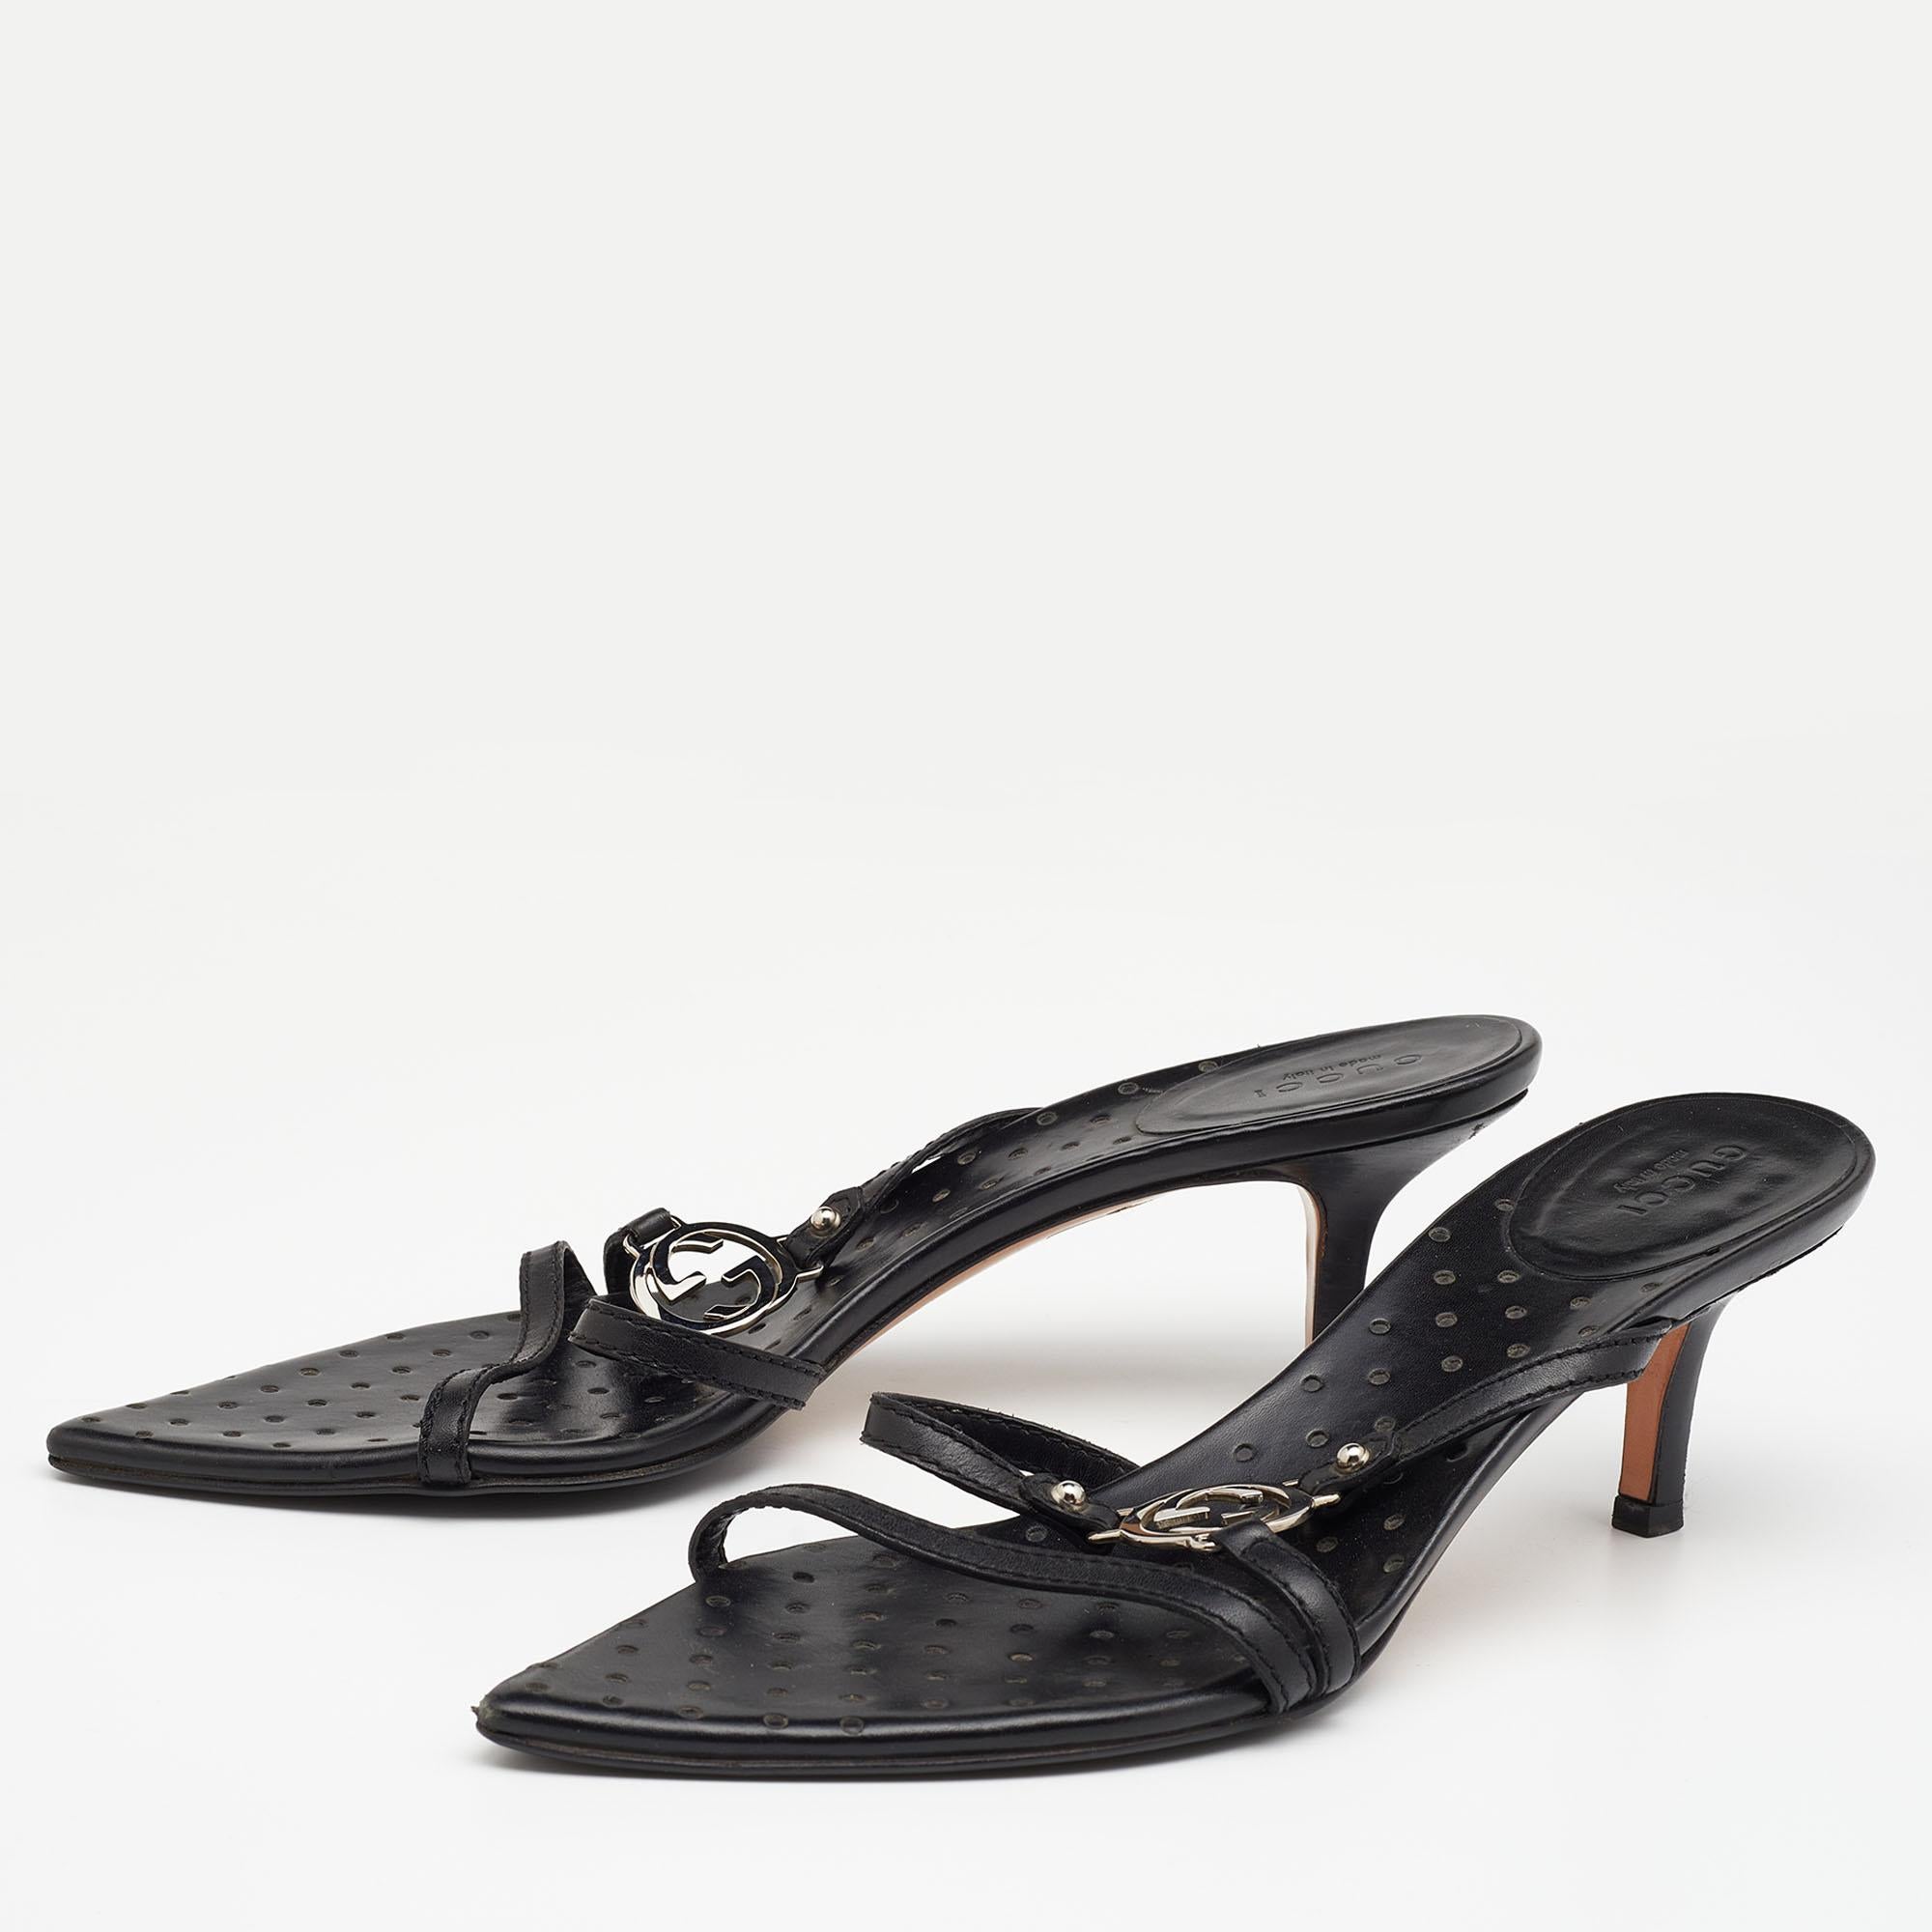 Complete your outfits with these beautiful Gucci sandals for women that are easy to wear and effortlessly stylish. Constructed in leather, these slides feature thin straps and the famous interlocking G logo for a signature look.

Includes: Original